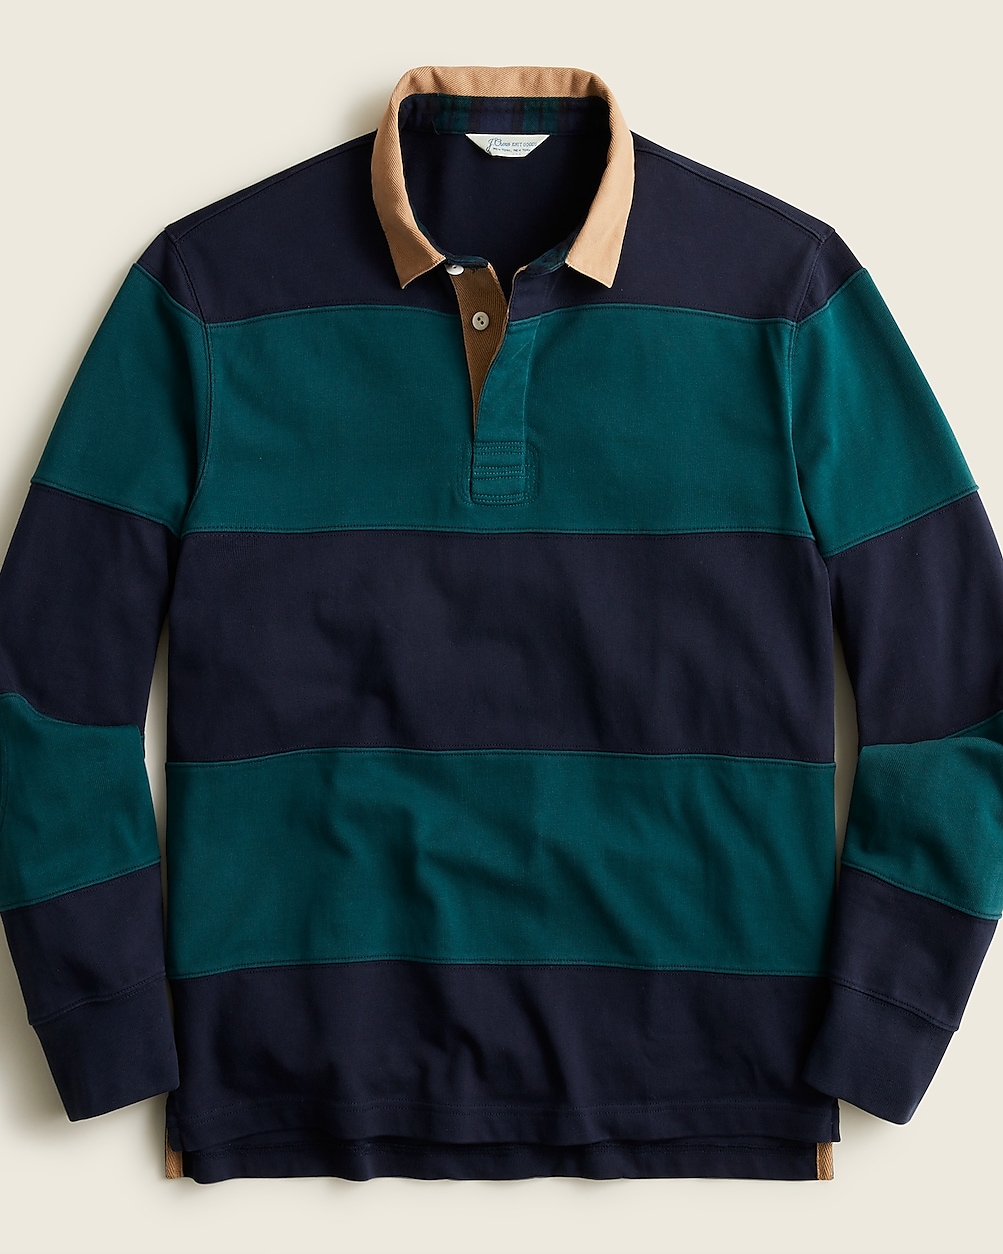 Rugby Shirt In Stripe For Men - J.Crew